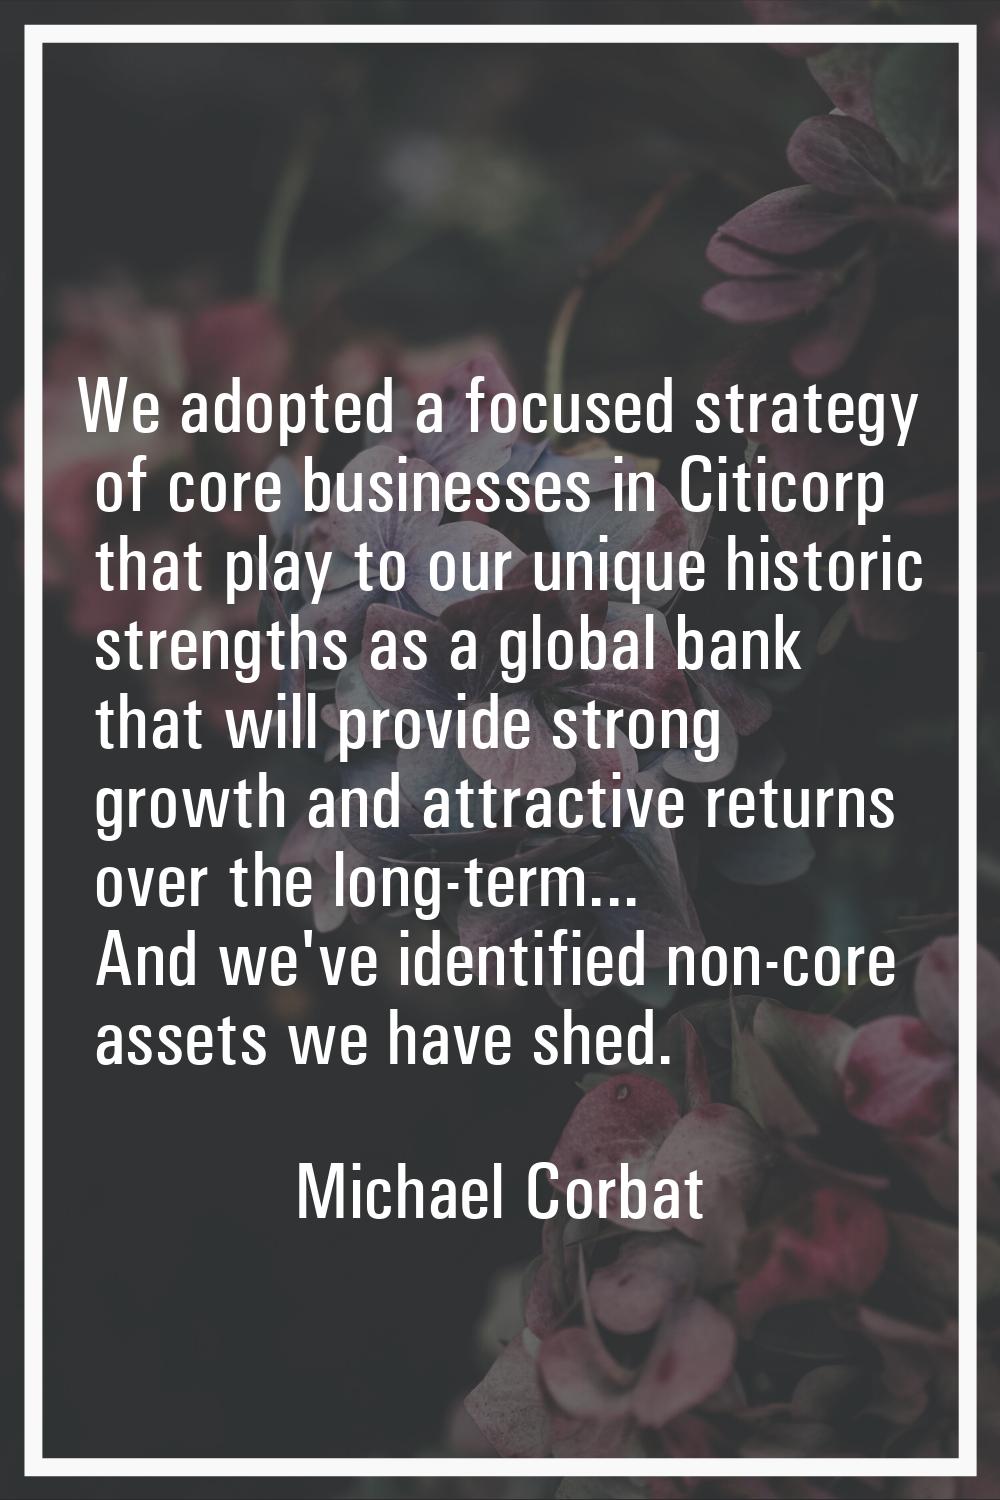 We adopted a focused strategy of core businesses in Citicorp that play to our unique historic stren